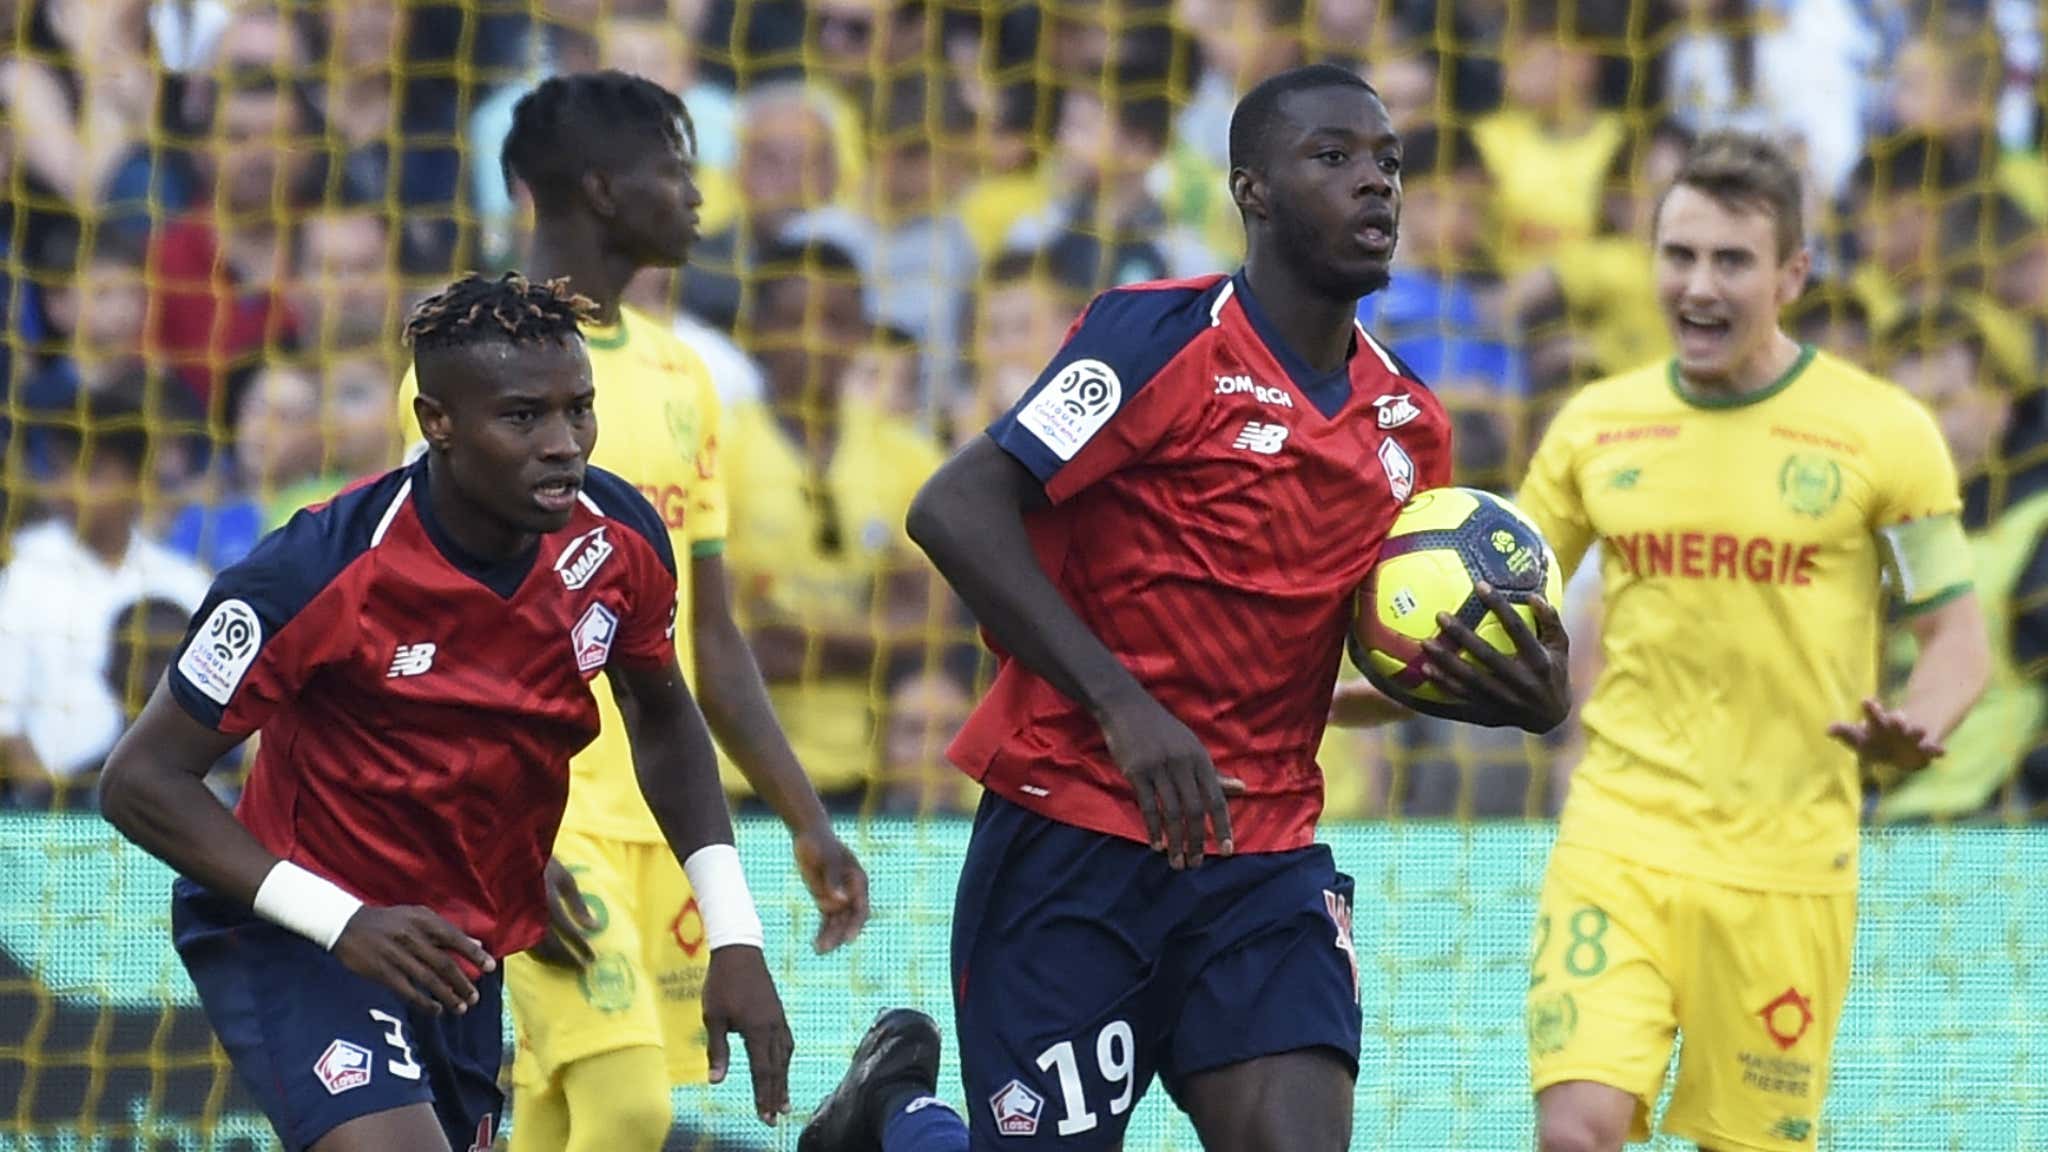 Lille’s Nicolas Pepe, Rennes’ Ismaila Sarr nominated for Ligue 1 awards ...